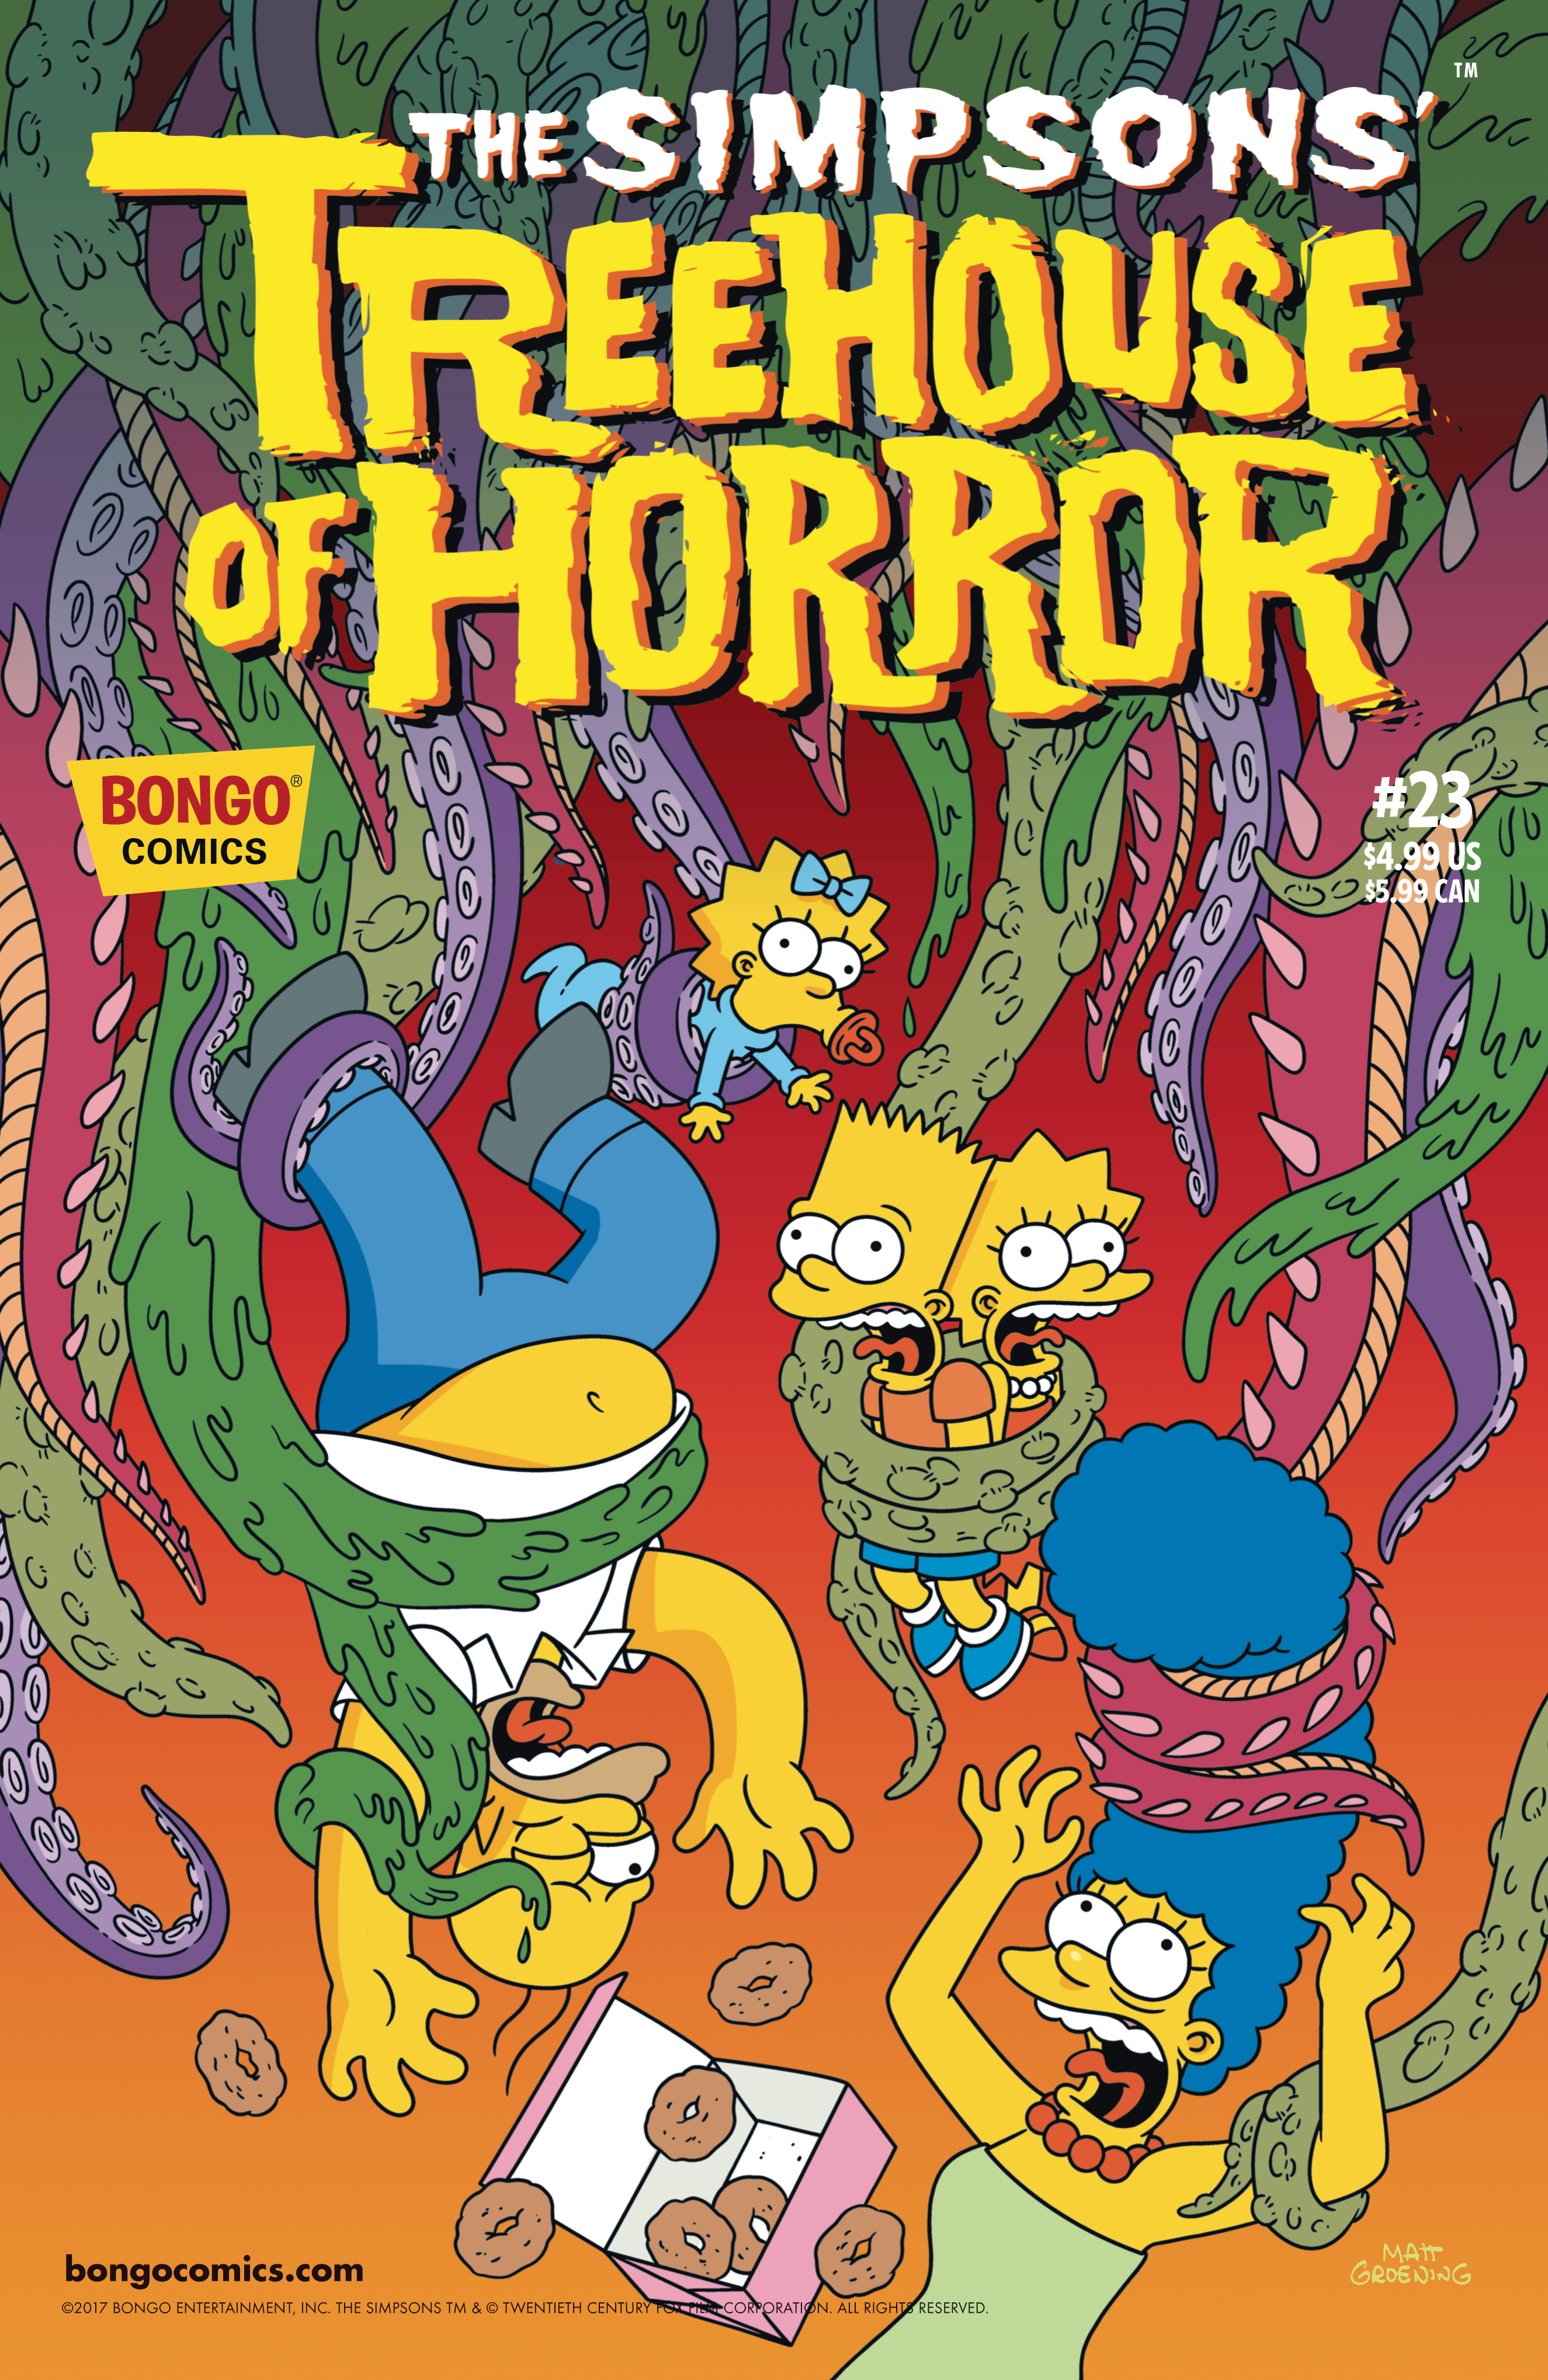 SIMPSONS TREEHOUSE OF HORROR #23